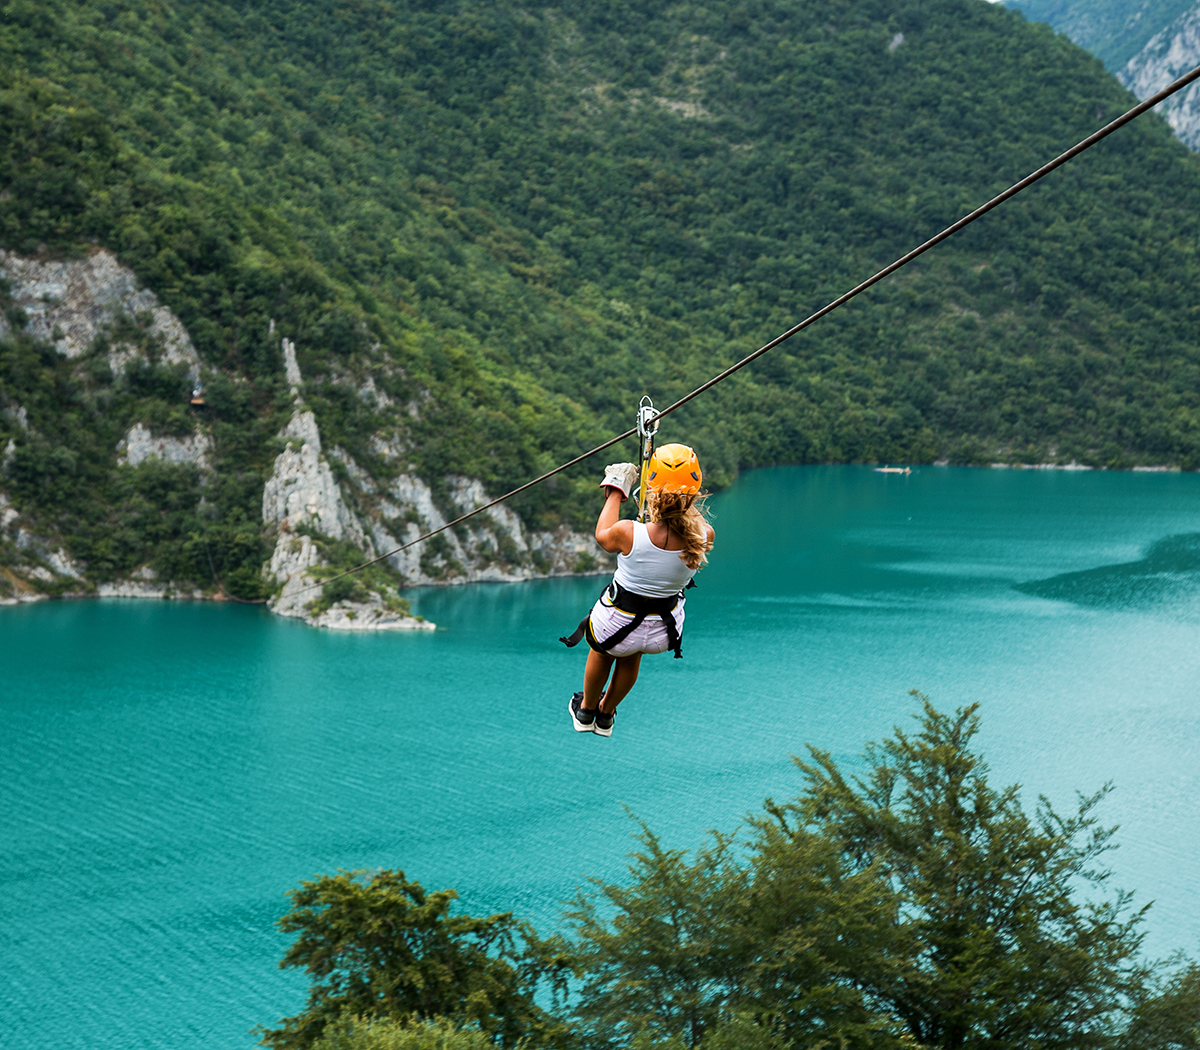 Woman sliding on a zip line over the blue lake